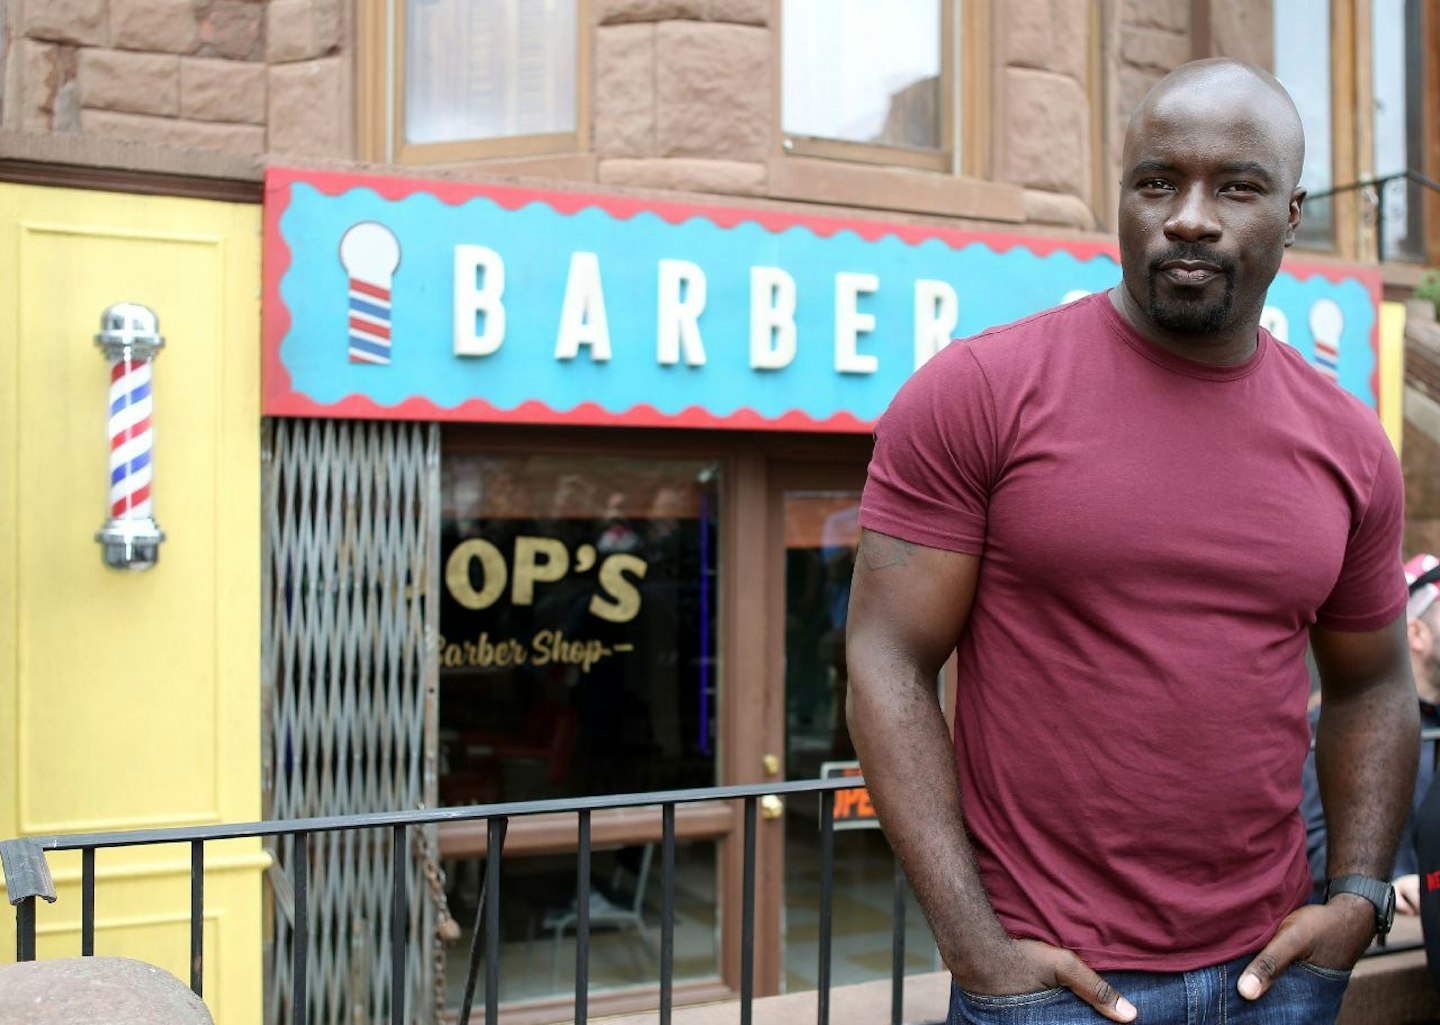 Mike Colter on the Harlem set of Luke Cage